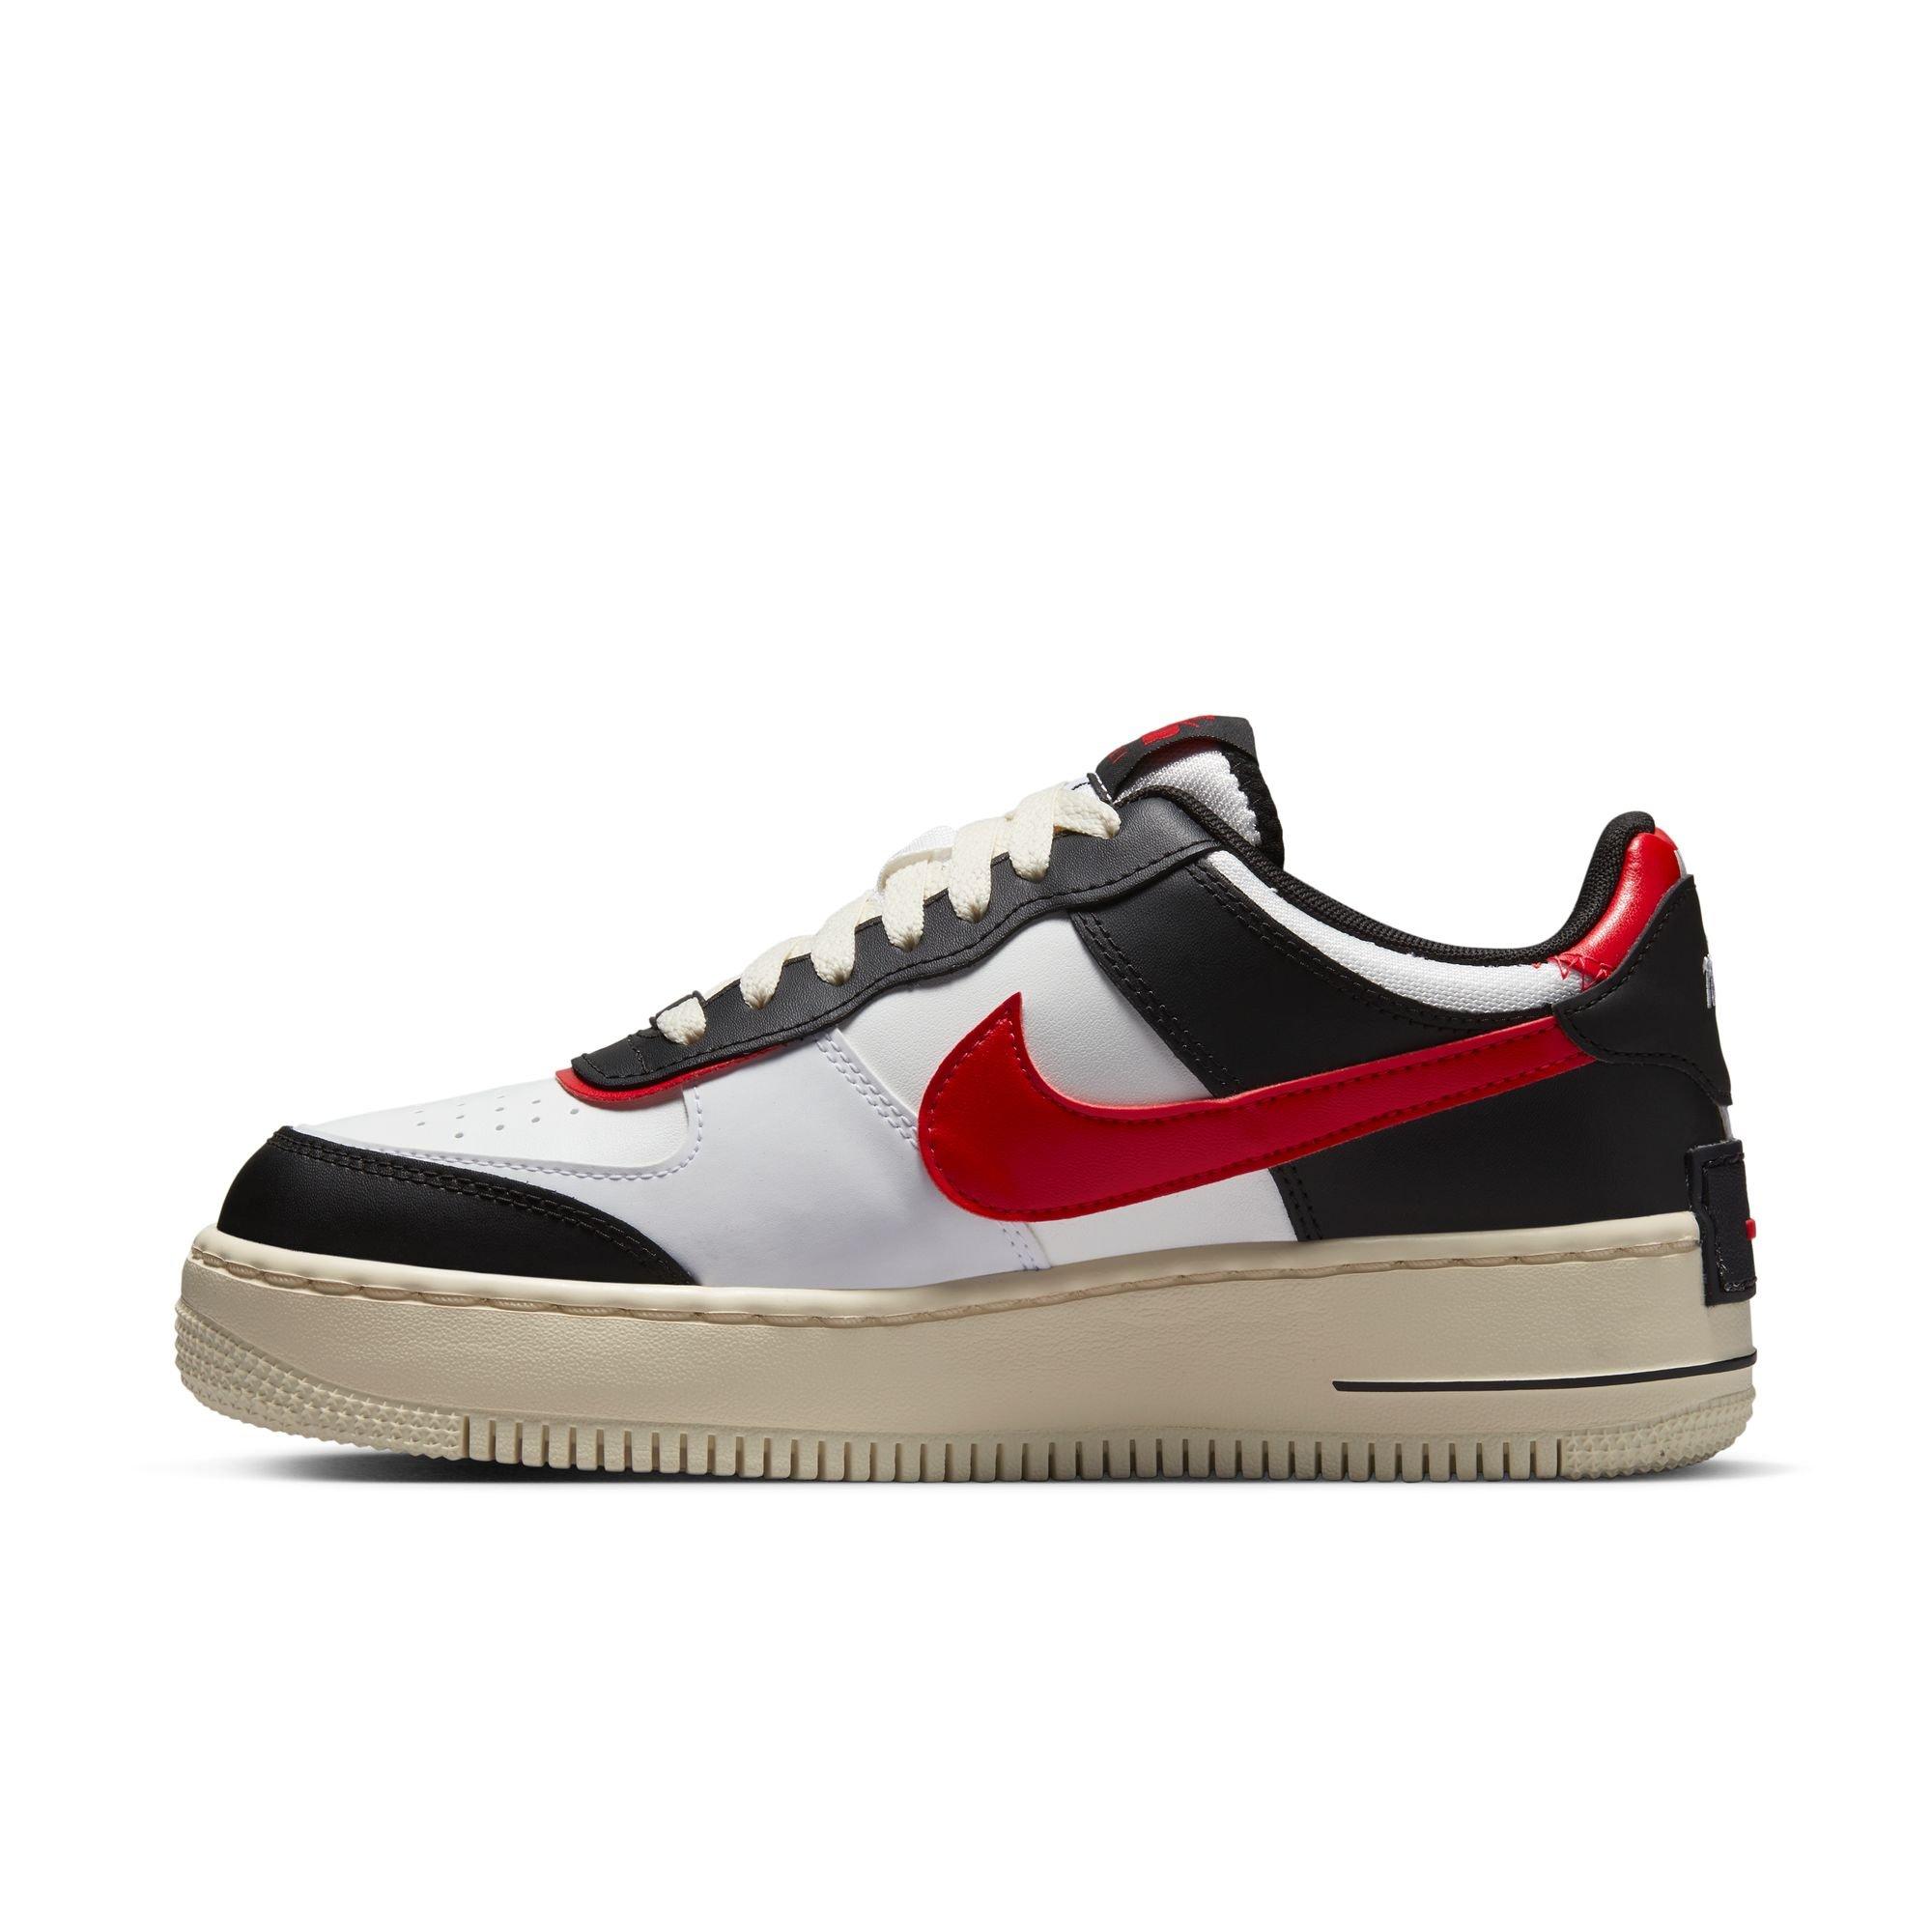 beslutte systematisk Indlejre Nike Air Force 1 Shadow "Summit White/University Red/Black" Women's Shoe